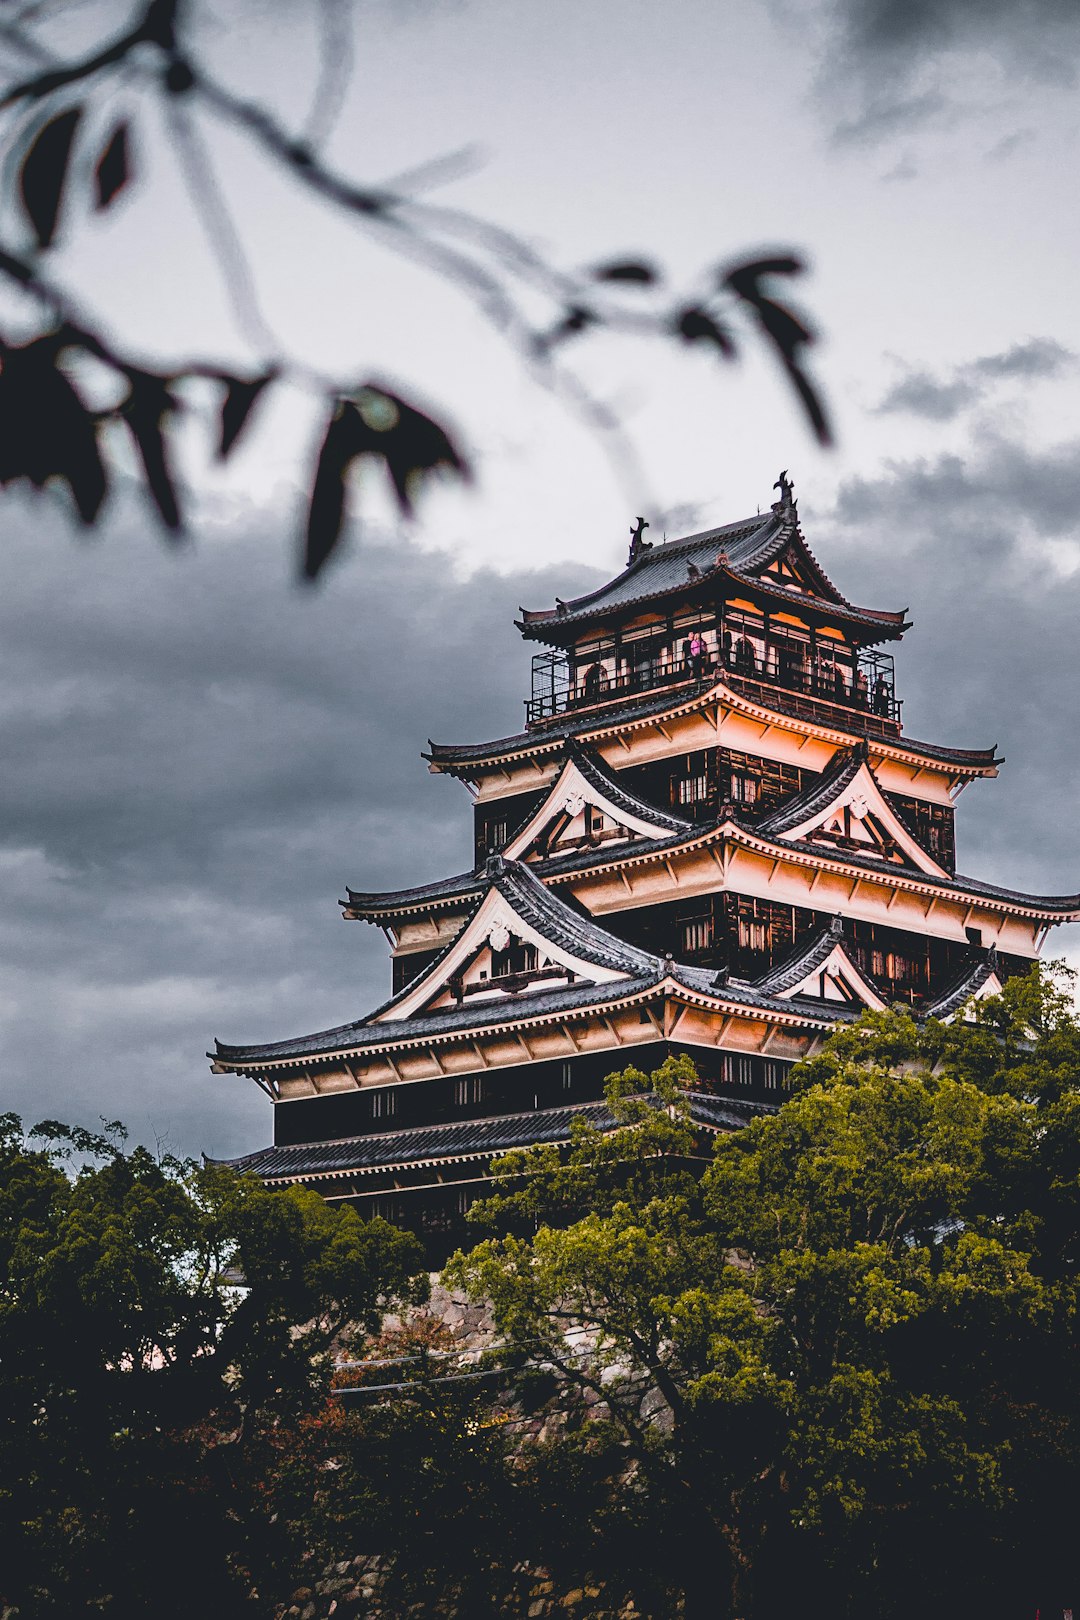 Travel Tips and Stories of Hiroshima in Japan